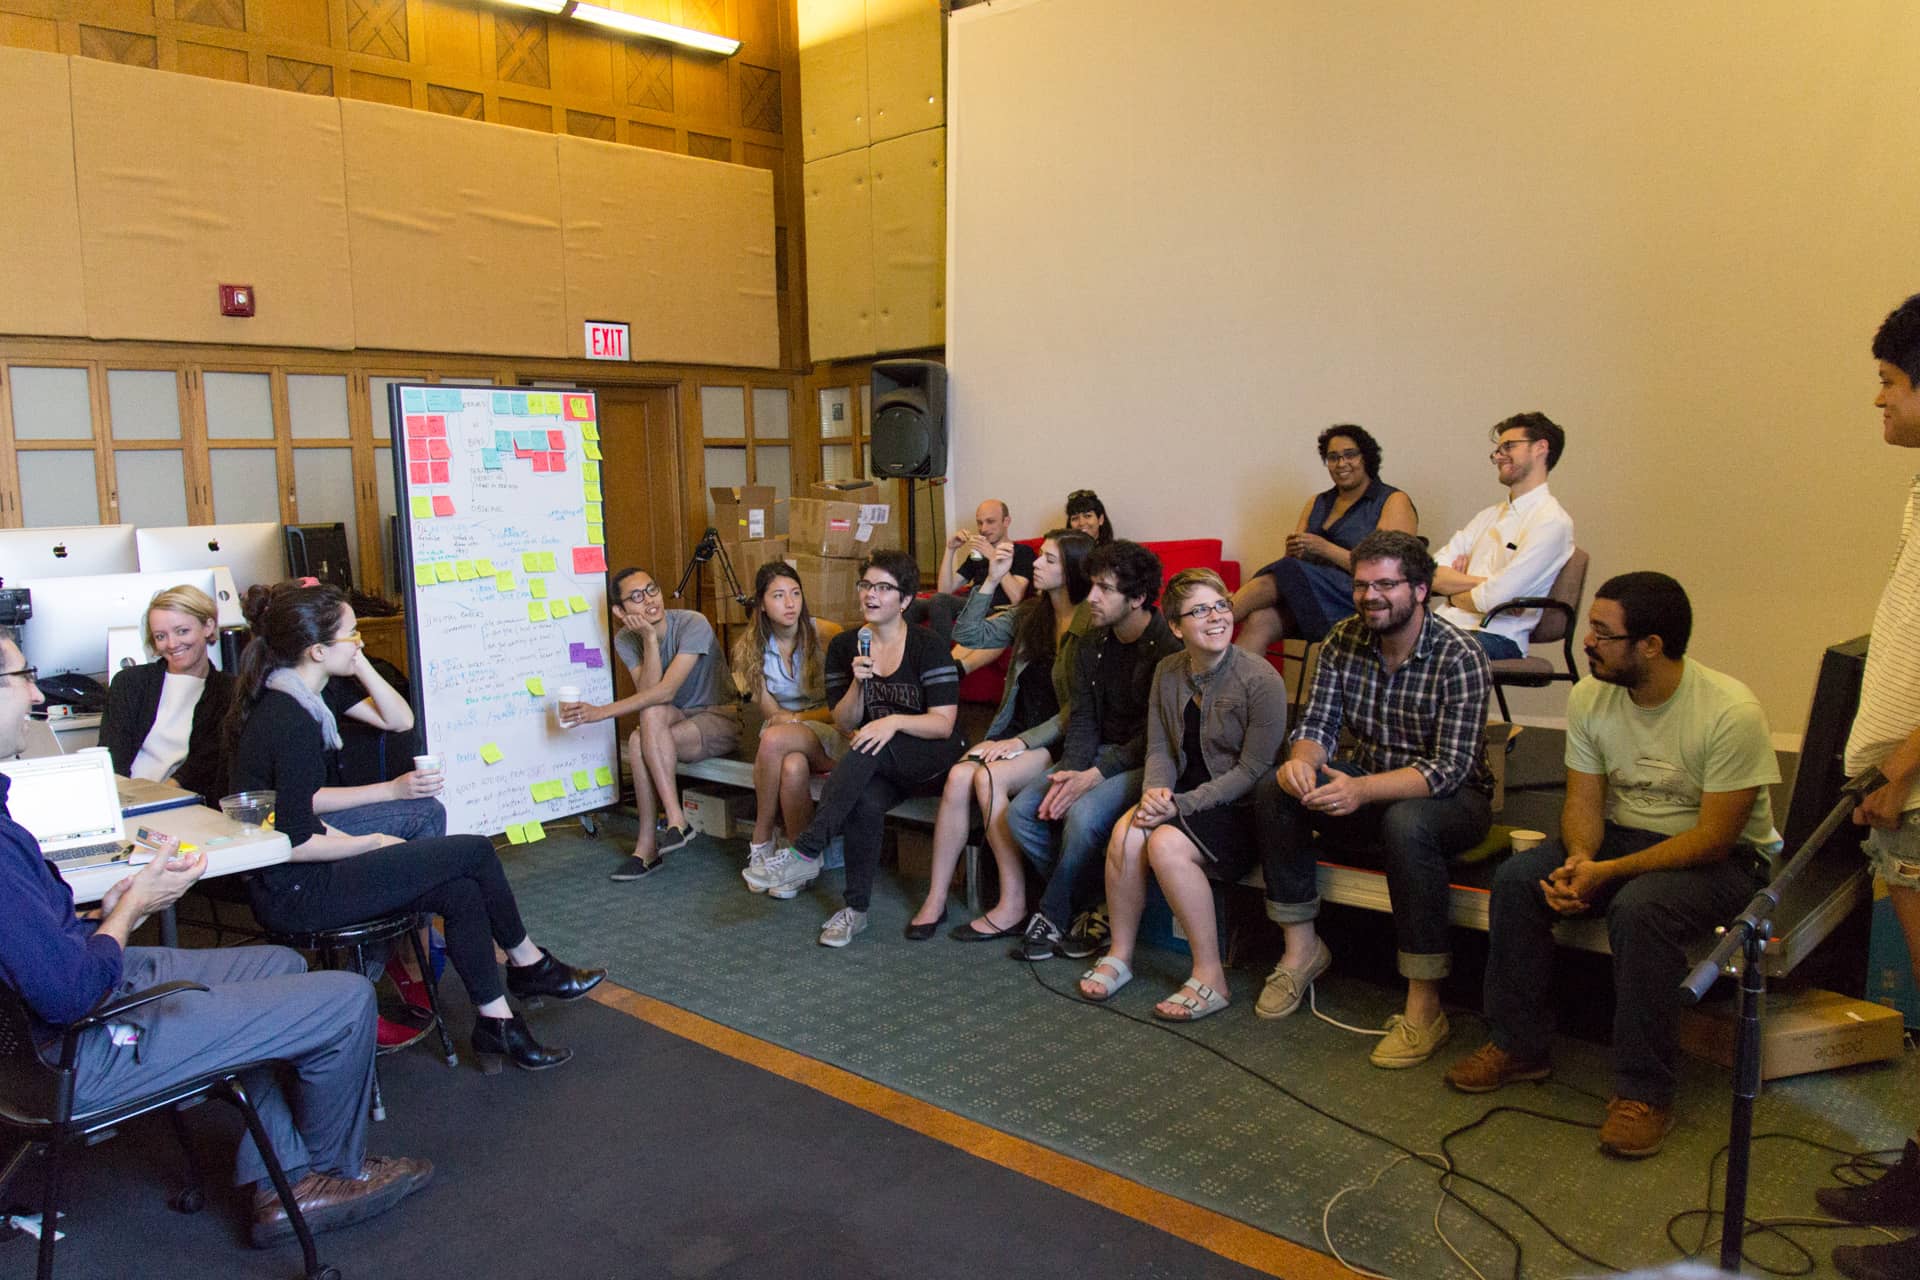 Participants sit in a circle around a white board with sticky notes on it while a female student speaks into a microphone"